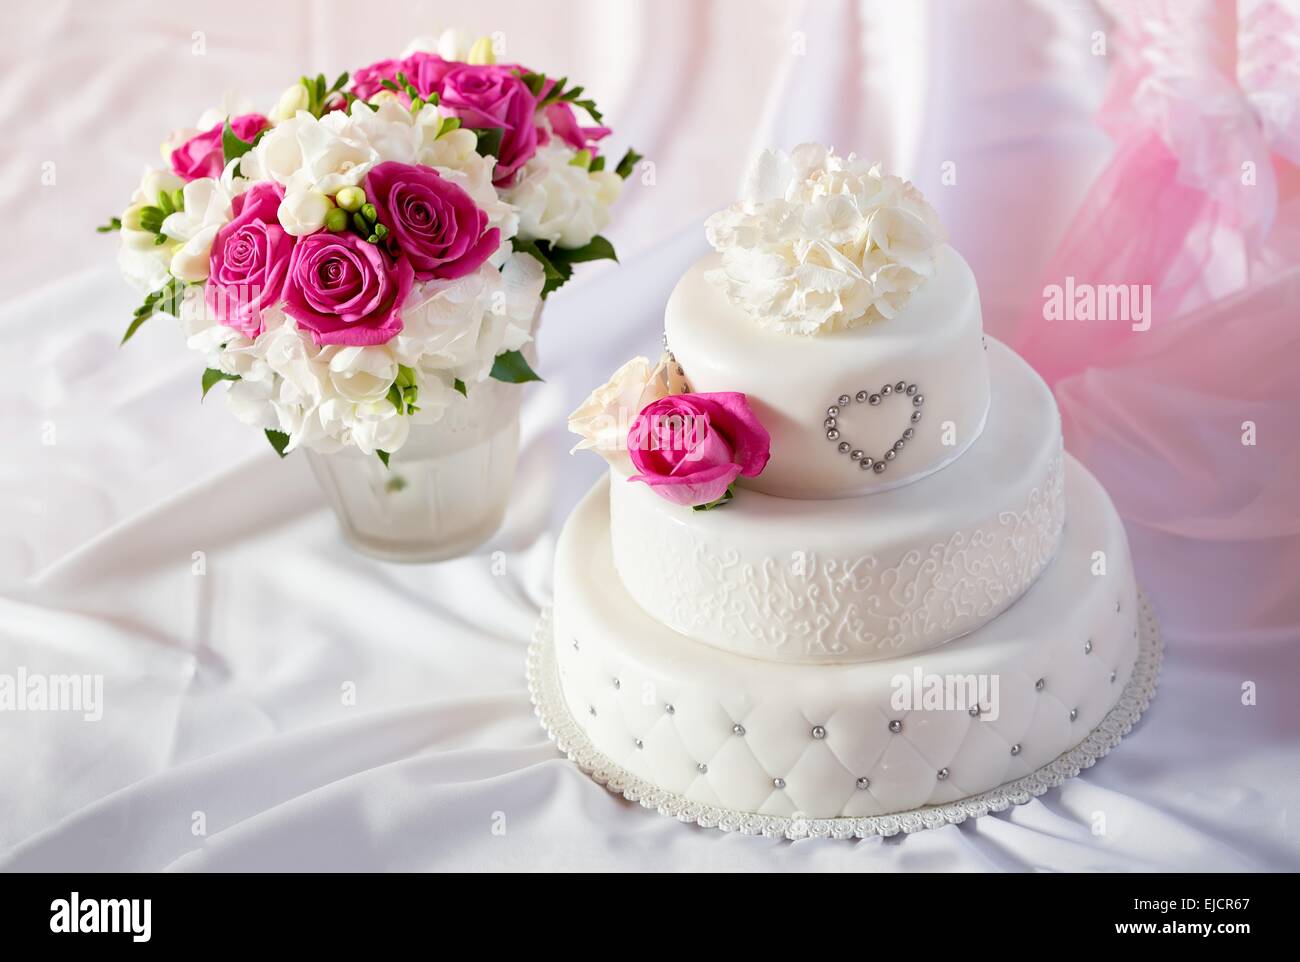 Traditional wedding cake and bridal bouquet Stock Photo